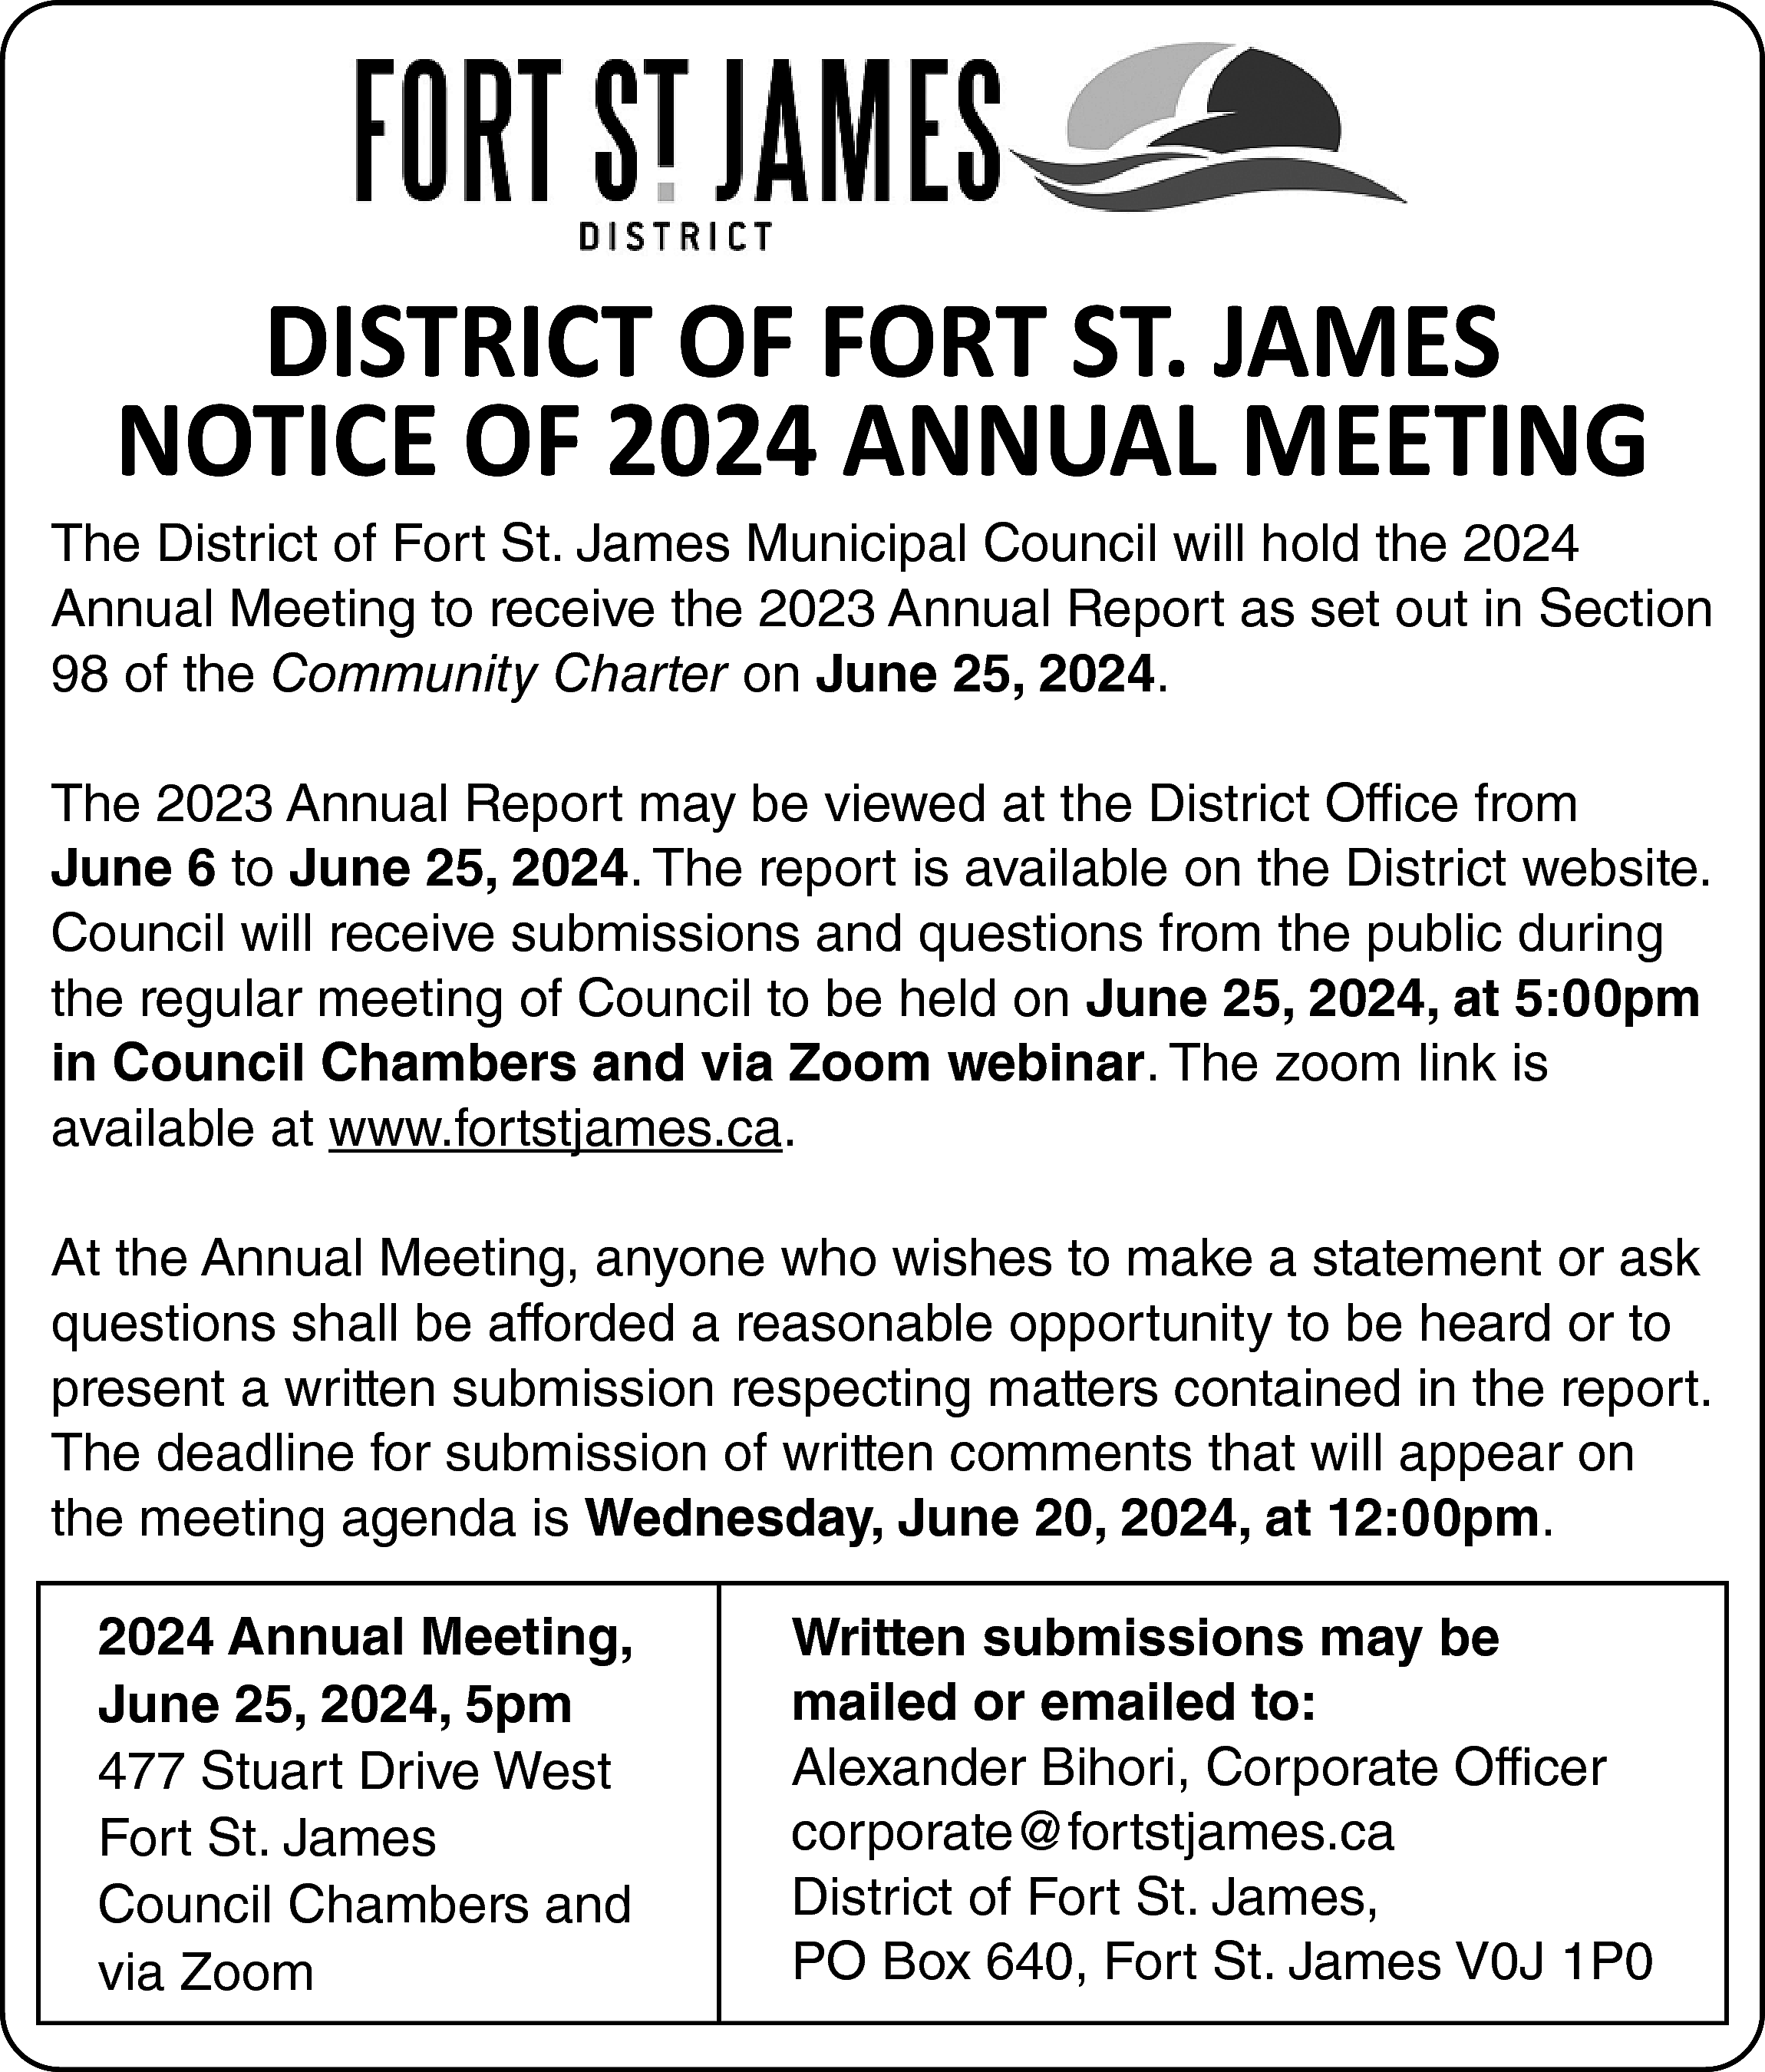 DISTRICT OF FORT ST. JAMES  DISTRICT OF FORT ST. JAMES  NOTICE OF 2024 ANNUAL MEETING    The District of Fort St. James Municipal Council will hold the 2024  Annual Meeting to receive the 2023 Annual Report as set out in Section  98 of the Community Charter on June 25, 2024.  The 2023 Annual Report may be viewed at the District Office from  June 6 to June 25, 2024. The report is available on the District website.  Council will receive submissions and questions from the public during  the regular meeting of Council to be held on June 25, 2024, at 5:00pm  in Council Chambers and via Zoom webinar. The zoom link is  available at www.fortstjames.ca.  At the Annual Meeting, anyone who wishes to make a statement or ask  questions shall be afforded a reasonable opportunity to be heard or to  present a written submission respecting matters contained in the report.  The deadline for submission of written comments that will appear on  the meeting agenda is Wednesday, June 20, 2024, at 12:00pm.  2024 Annual Meeting,  June 25, 2024, 5pm  477 Stuart Drive West  Fort St. James  Council Chambers and  via Zoom    Written submissions may be  mailed or emailed to:  Alexander Bihori, Corporate Officer  corporate@fortstjames.ca  District of Fort St. James,  PO Box 640, Fort St. James V0J 1P0    